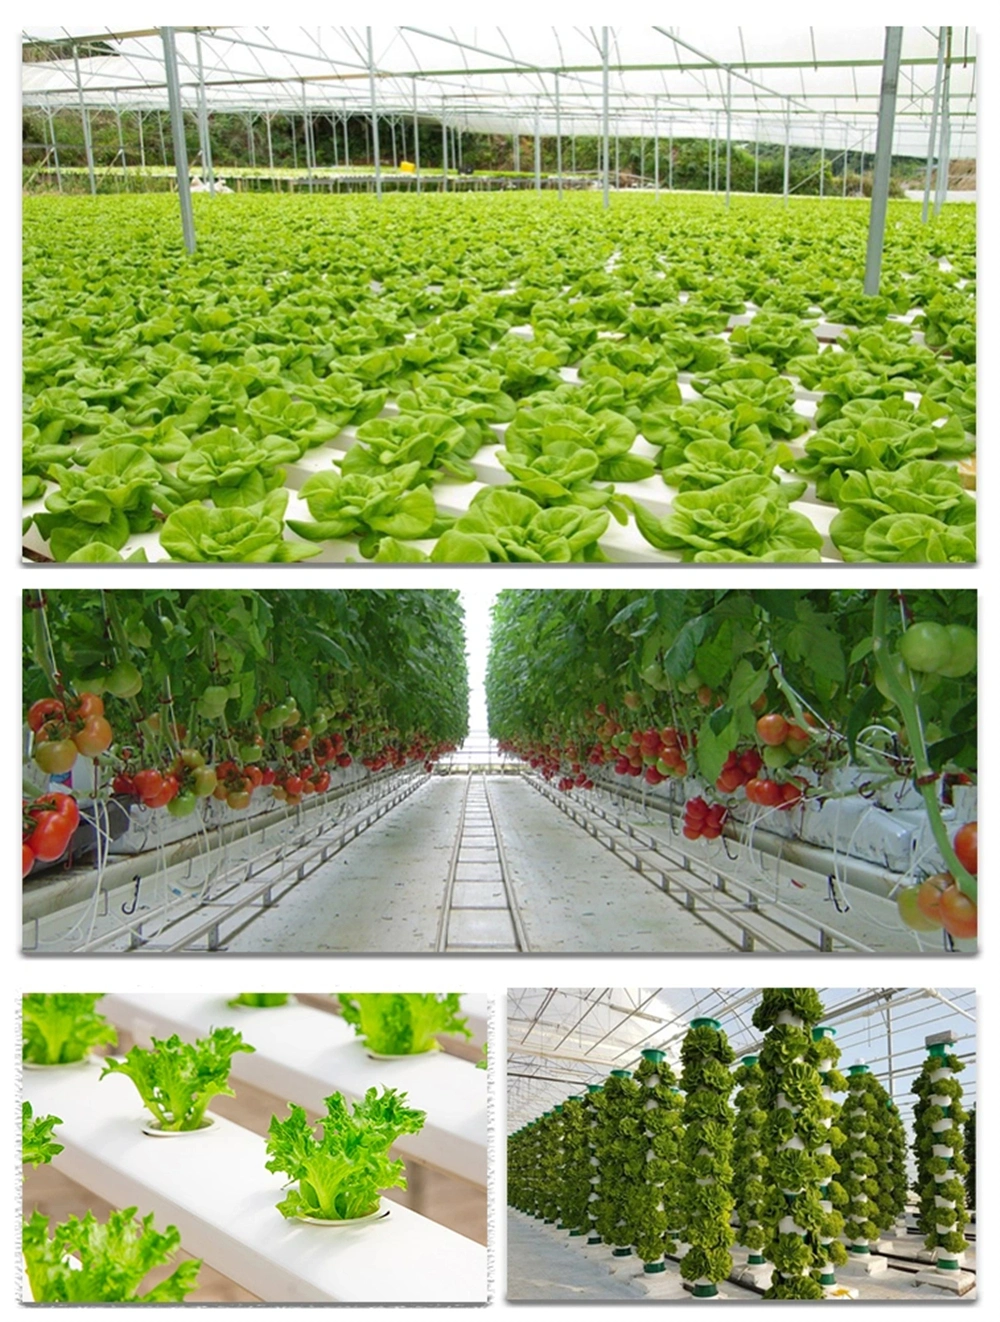 High Tunnel Plastic Film Used Greenhouse Hydroponics for Cucumber/Flower/Lettuce/Tomato/Cabbage Grow